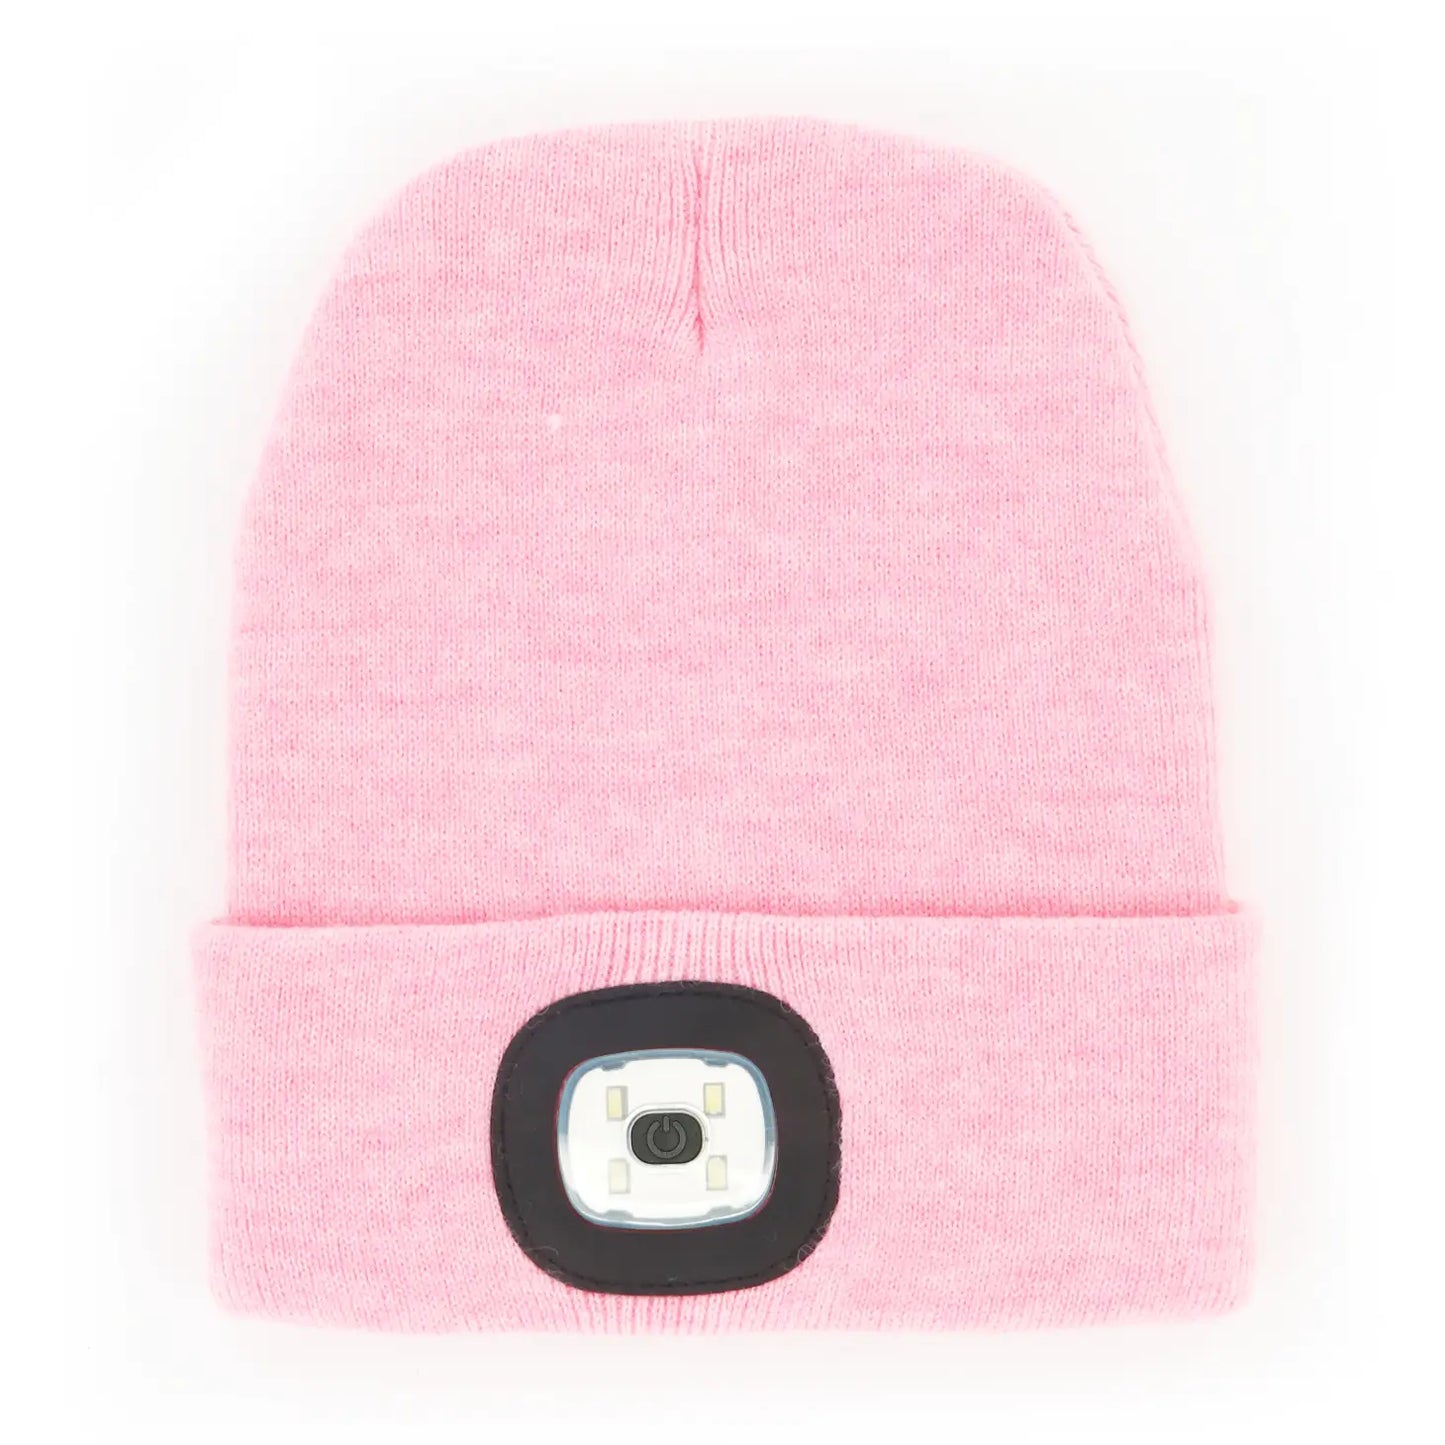 Night Scope Brightside Rechargeable LED Beanie